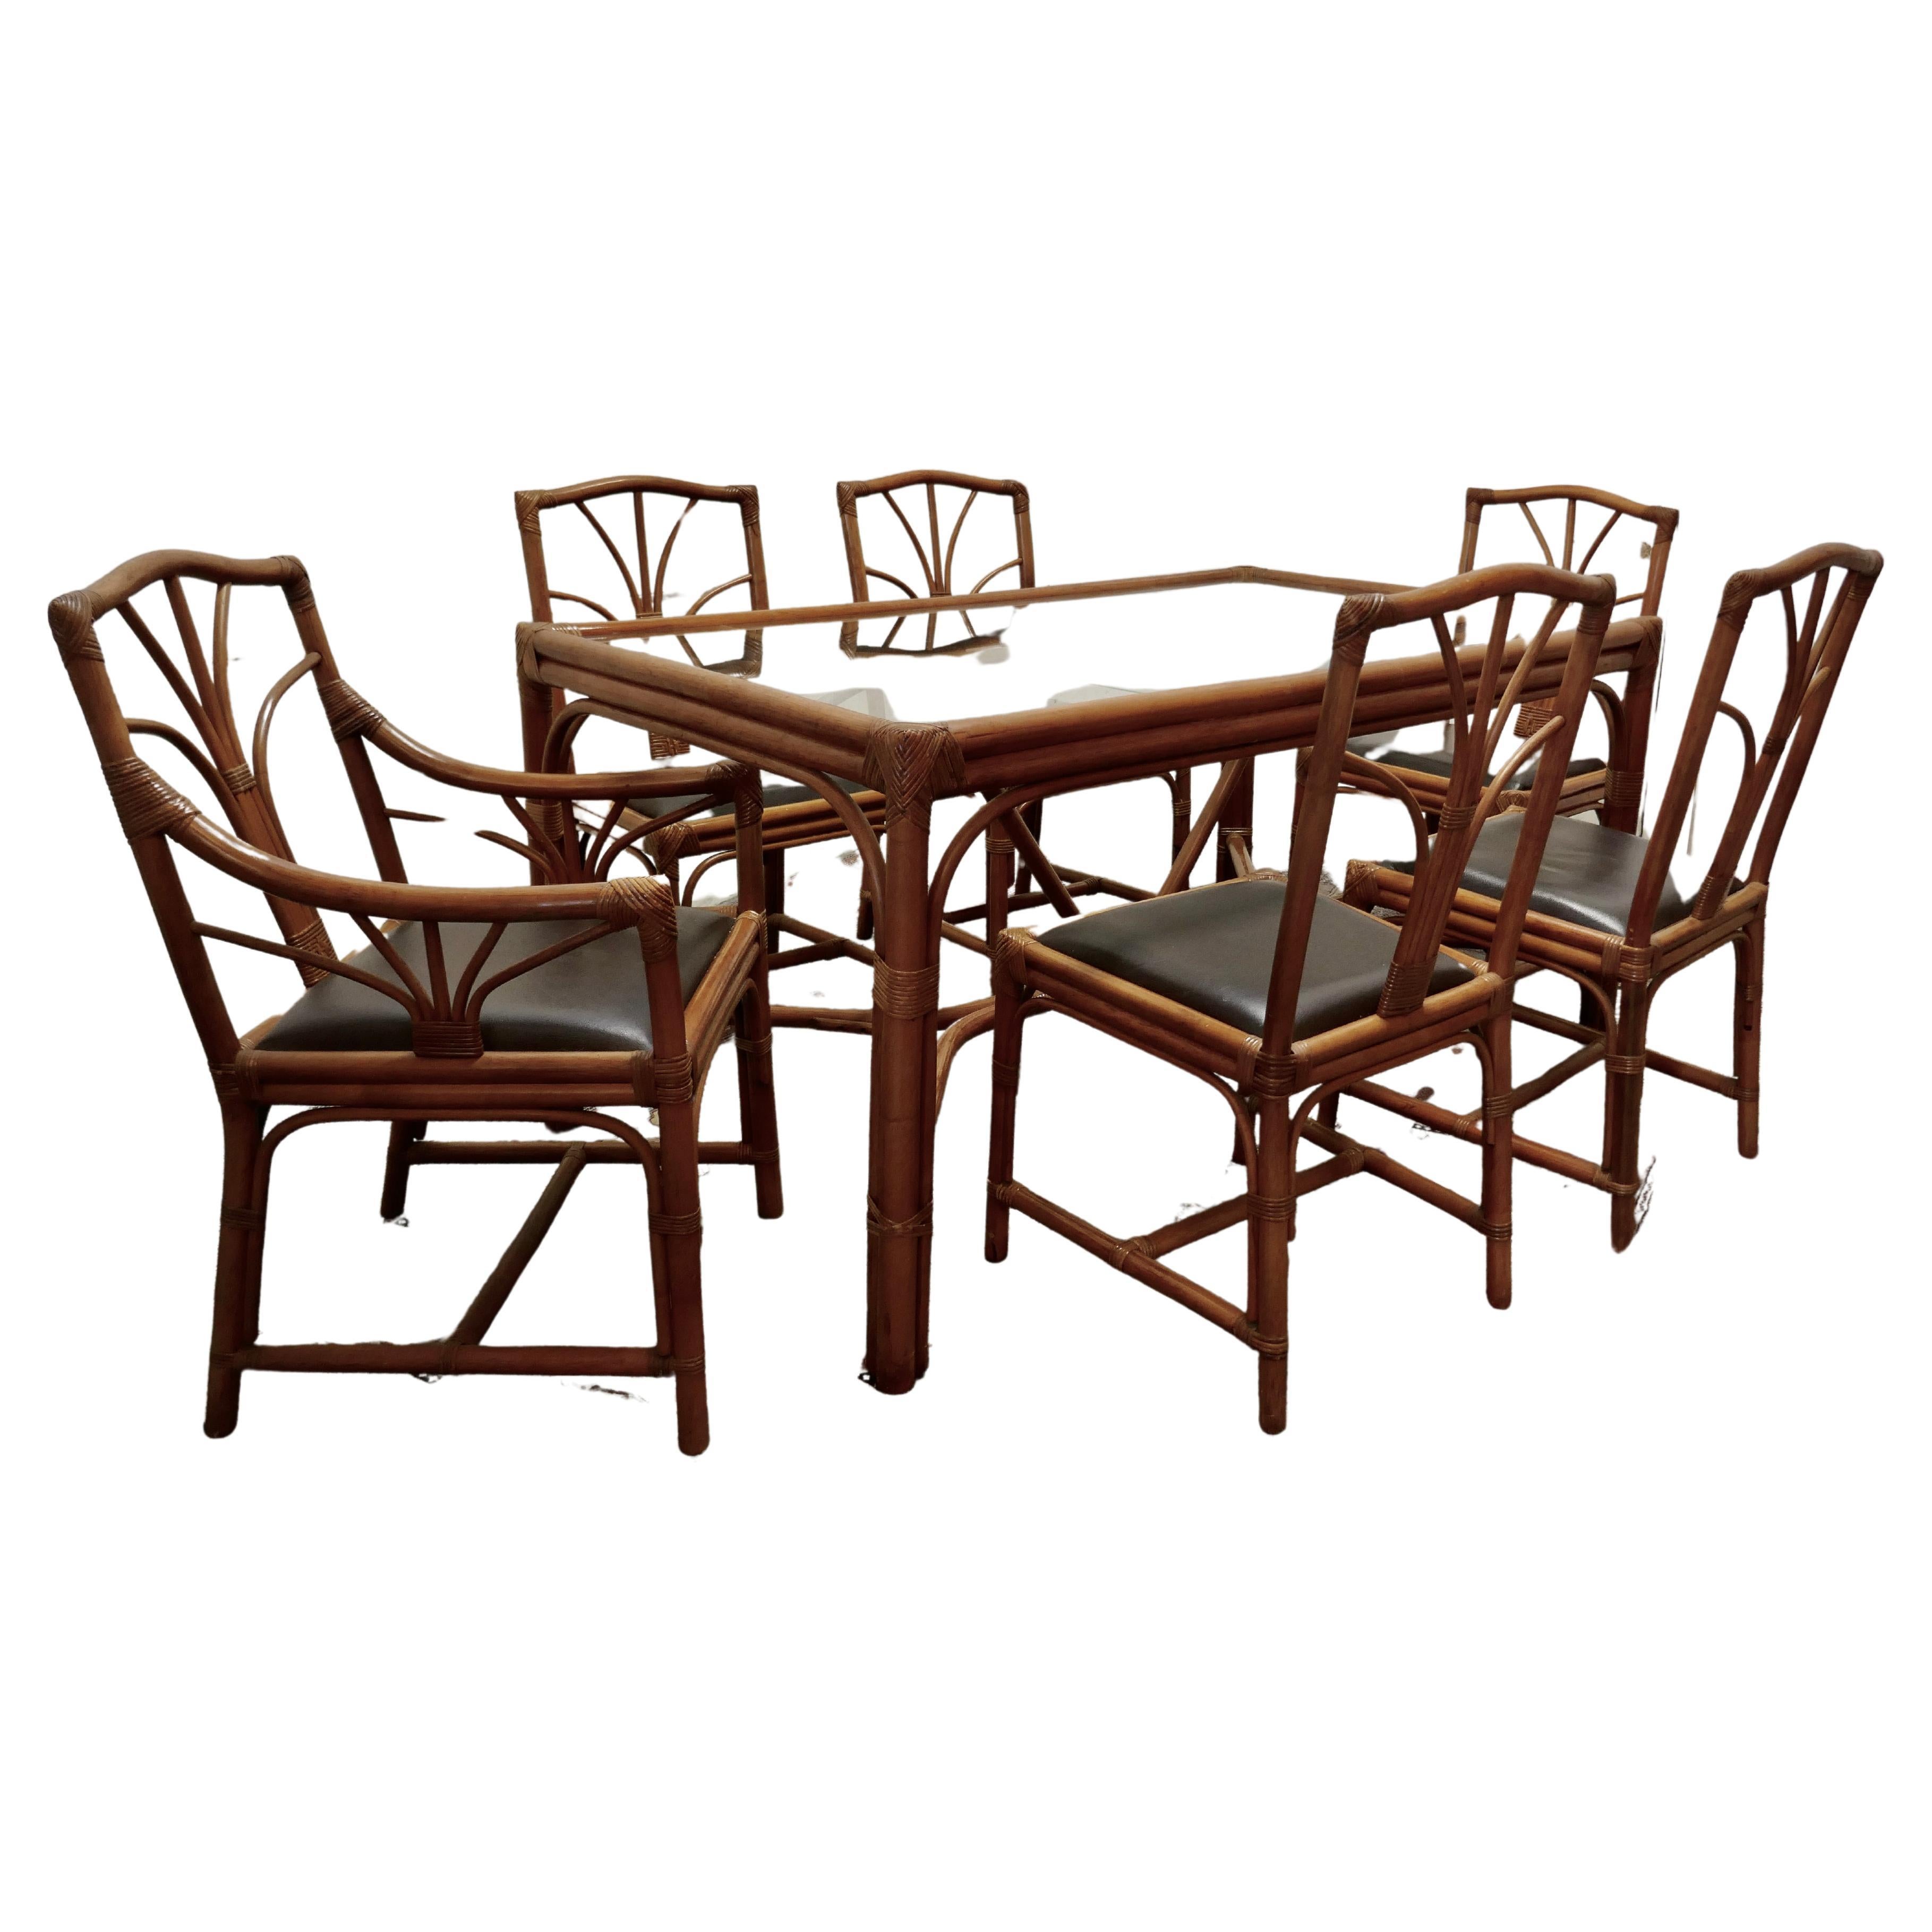 Regency Style Simulated Bamboo Dining Table and 6 Chairs    For Sale